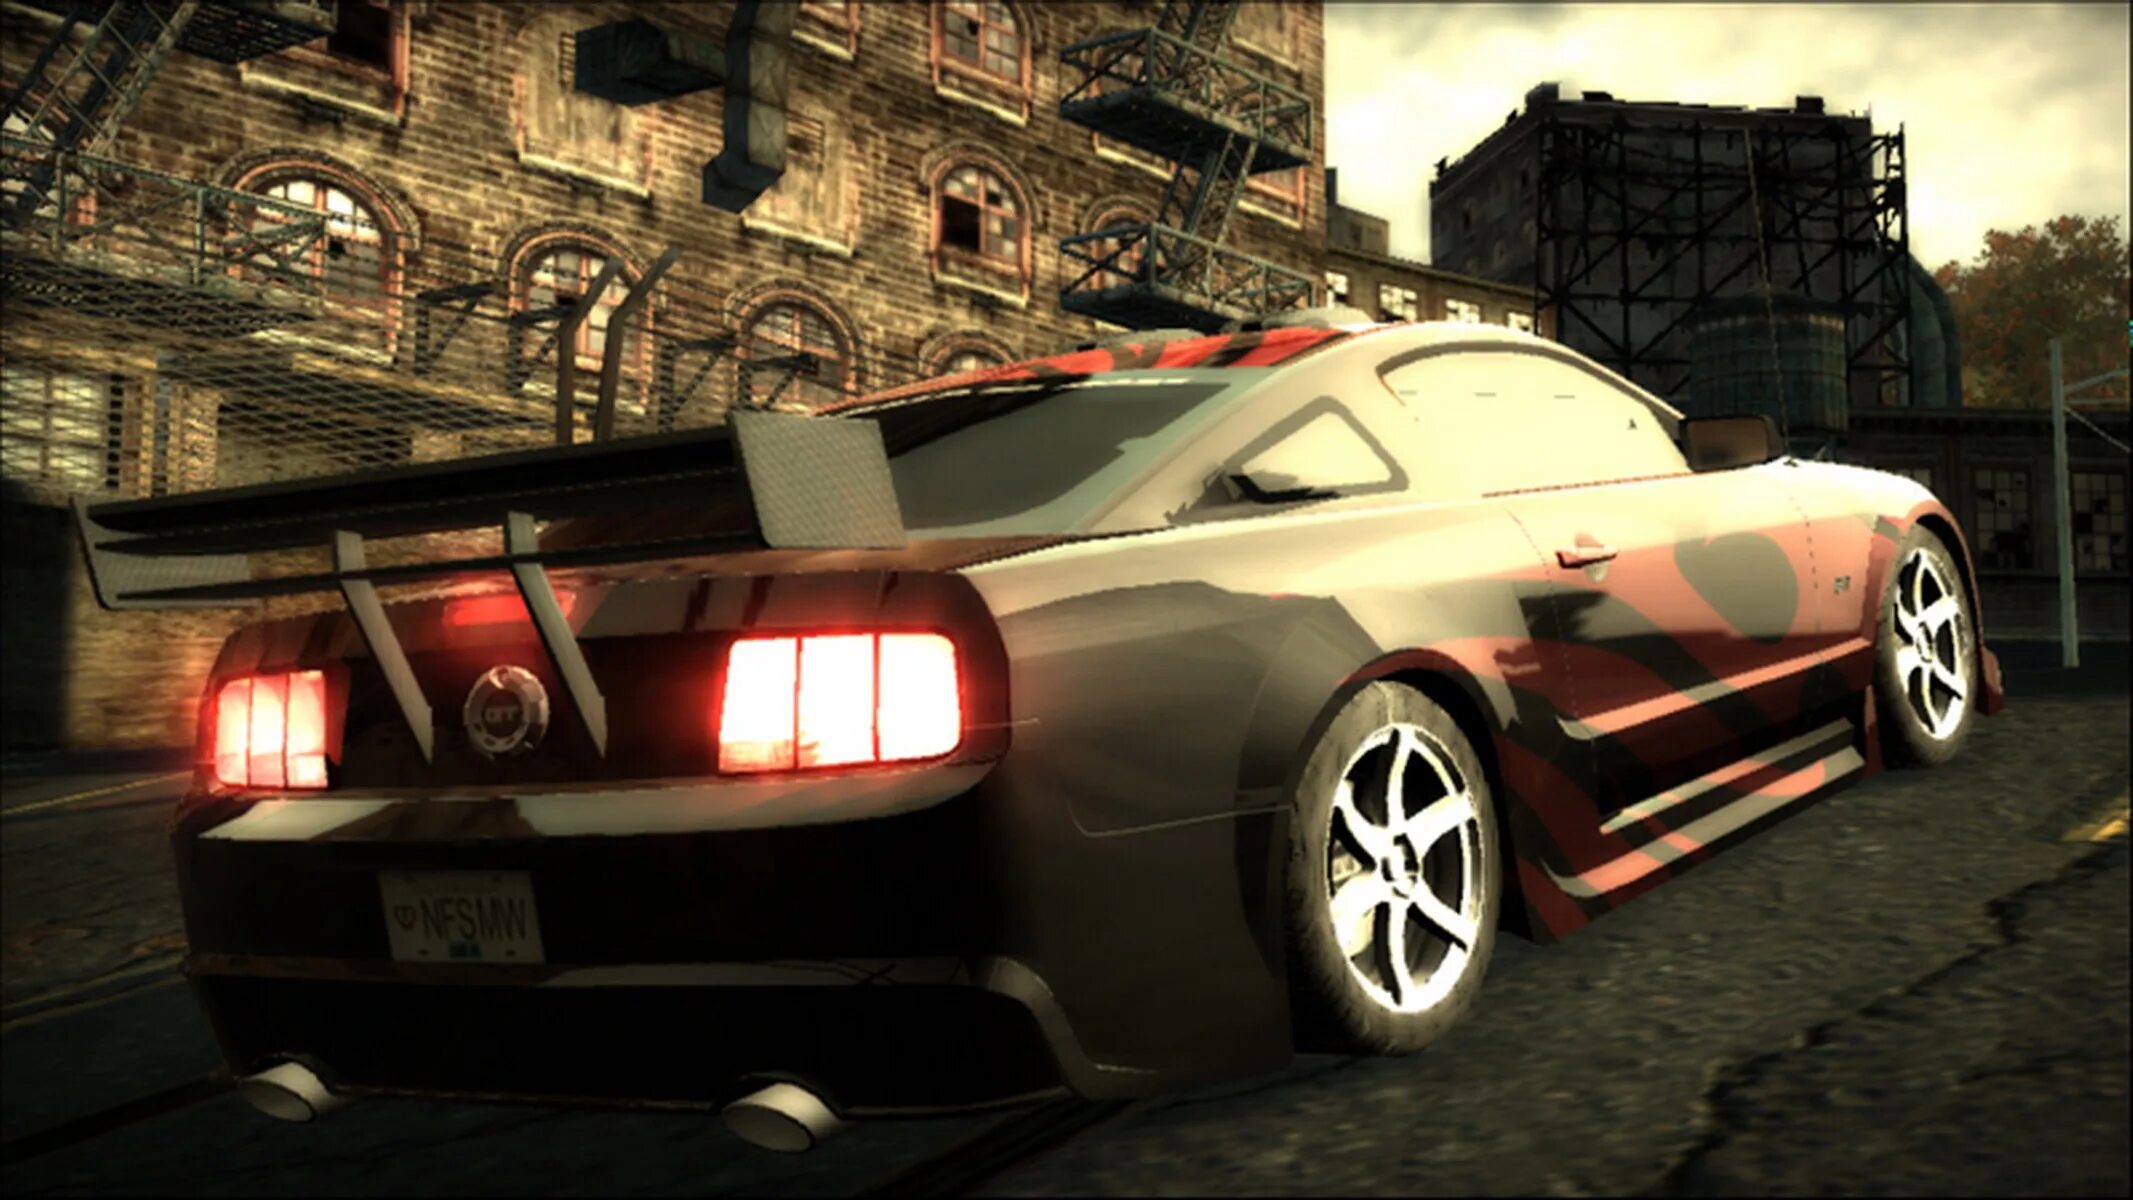 Машины в игре most wanted. Машина рога NFS most wanted. Мустанг 2005 NFS. NFS most wanted 2005 машины. Мустанг most wanted 2005.